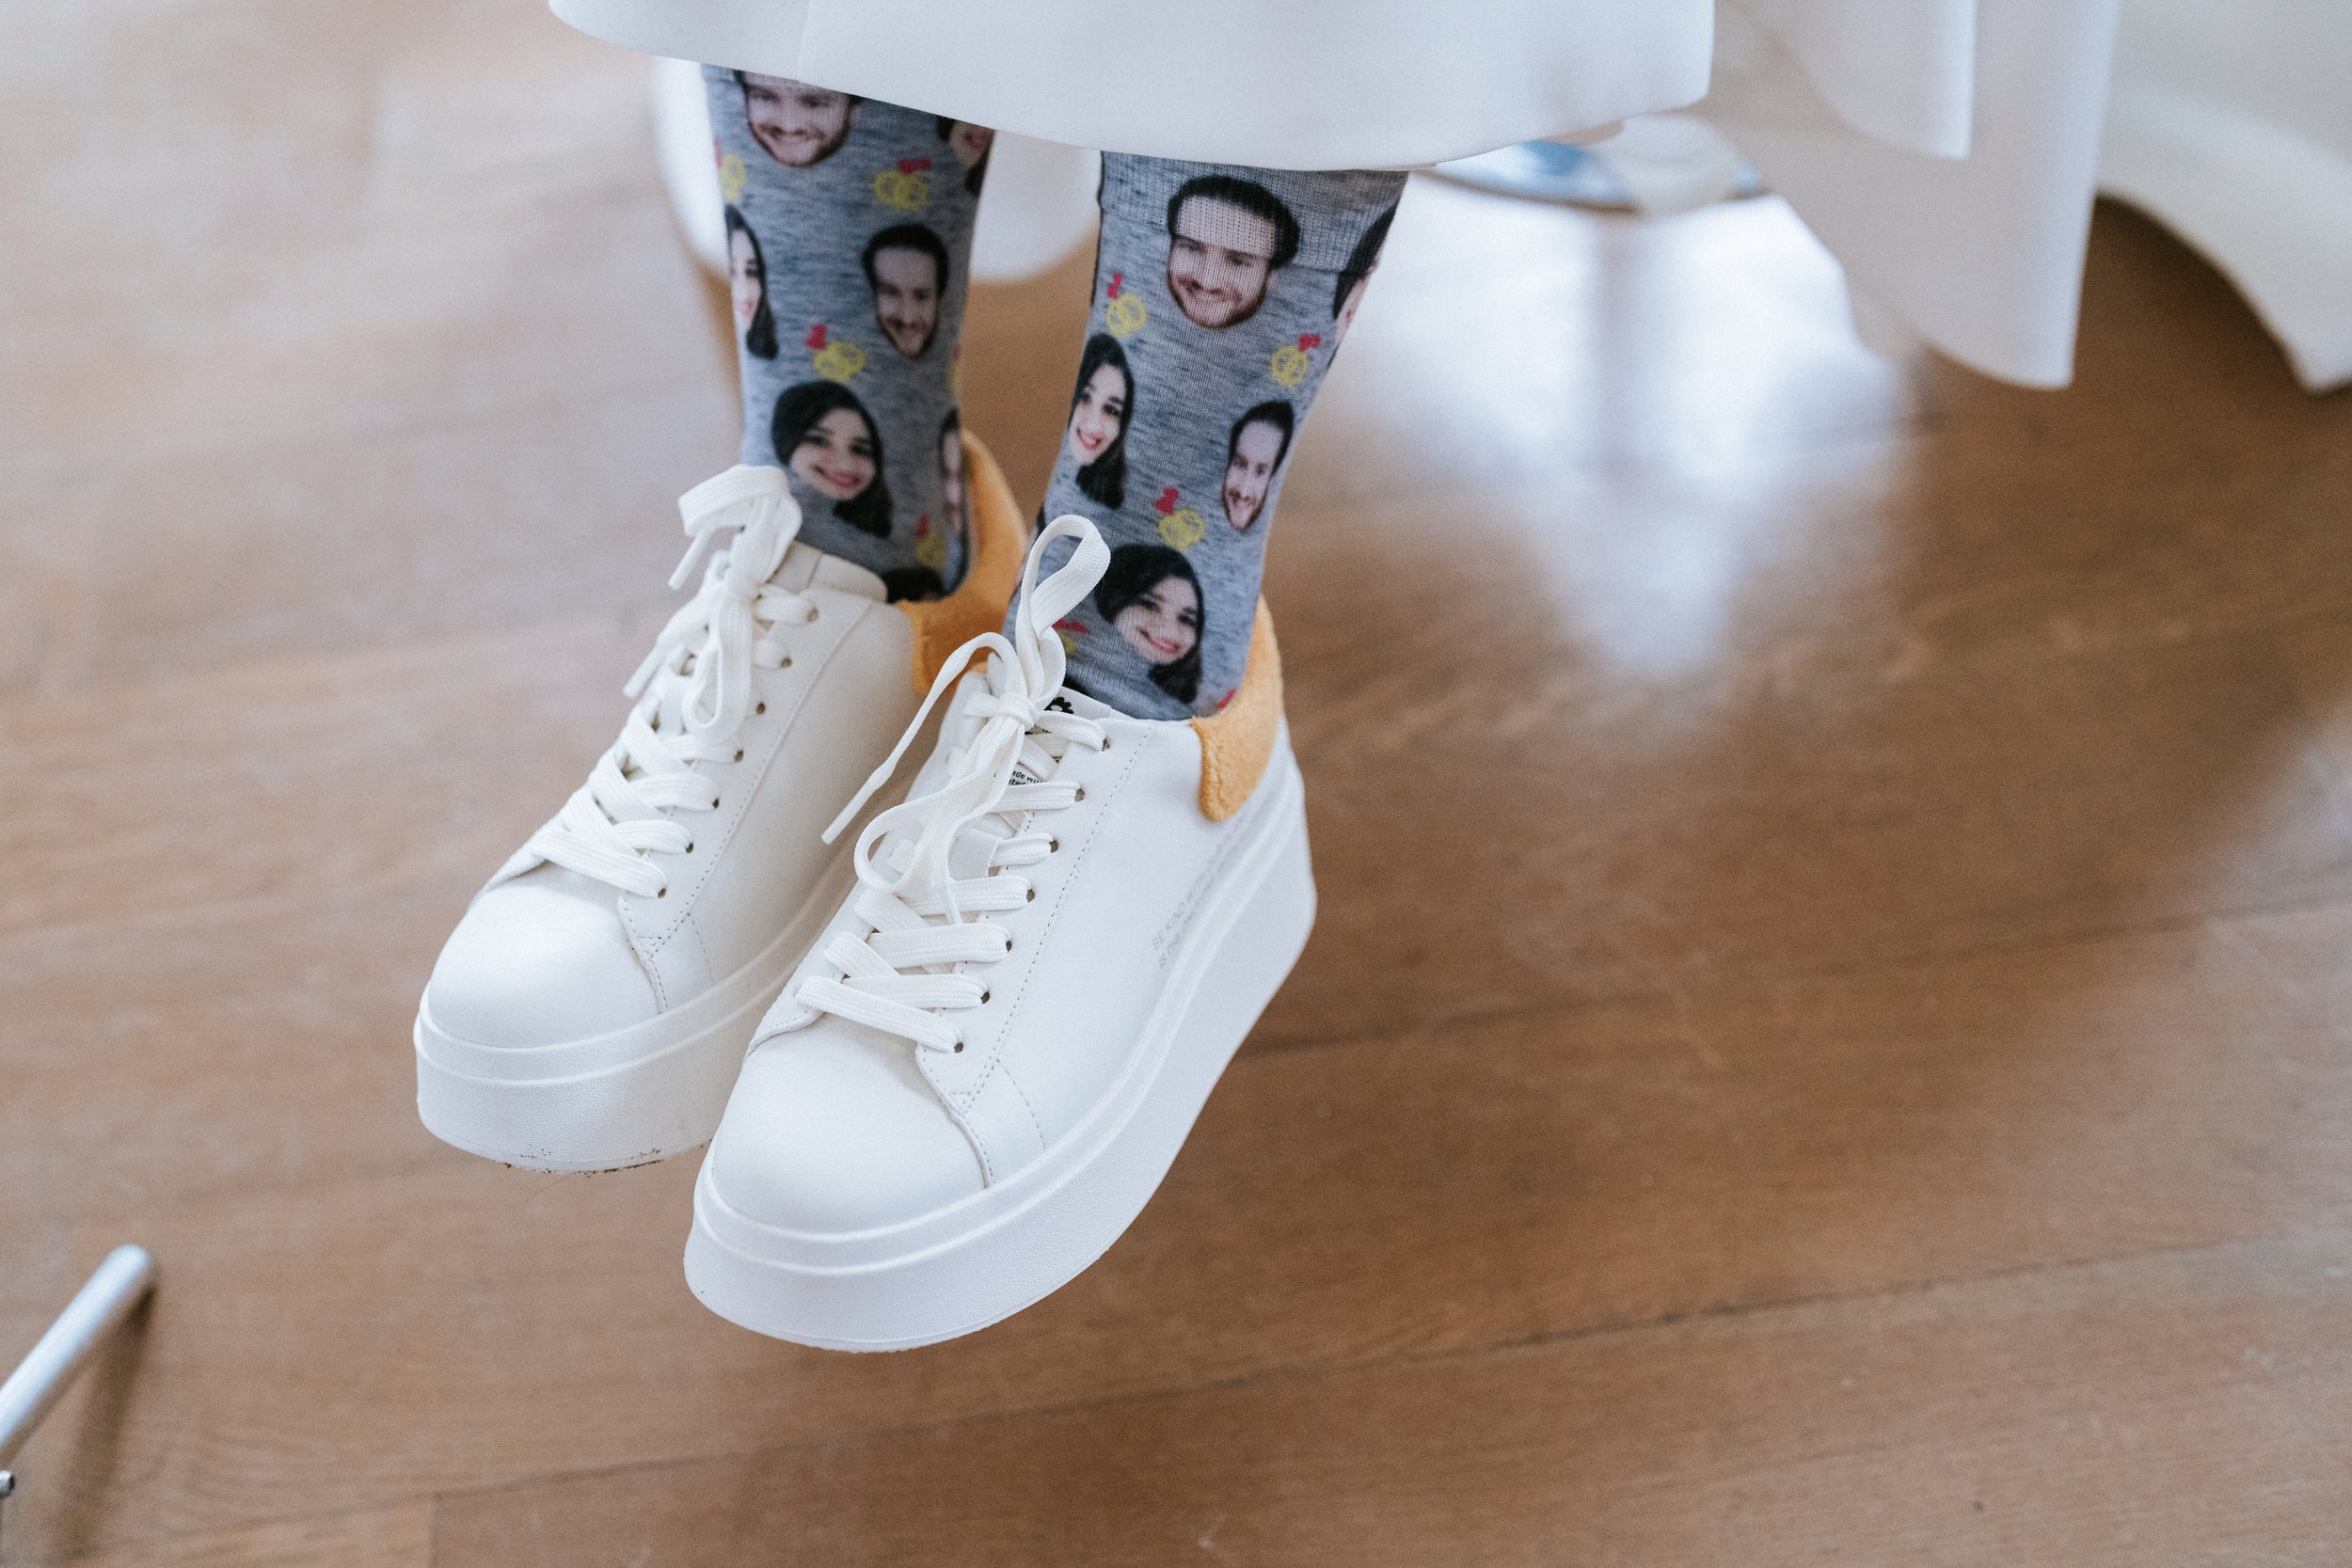 Bride wearing custom socks with faces on them